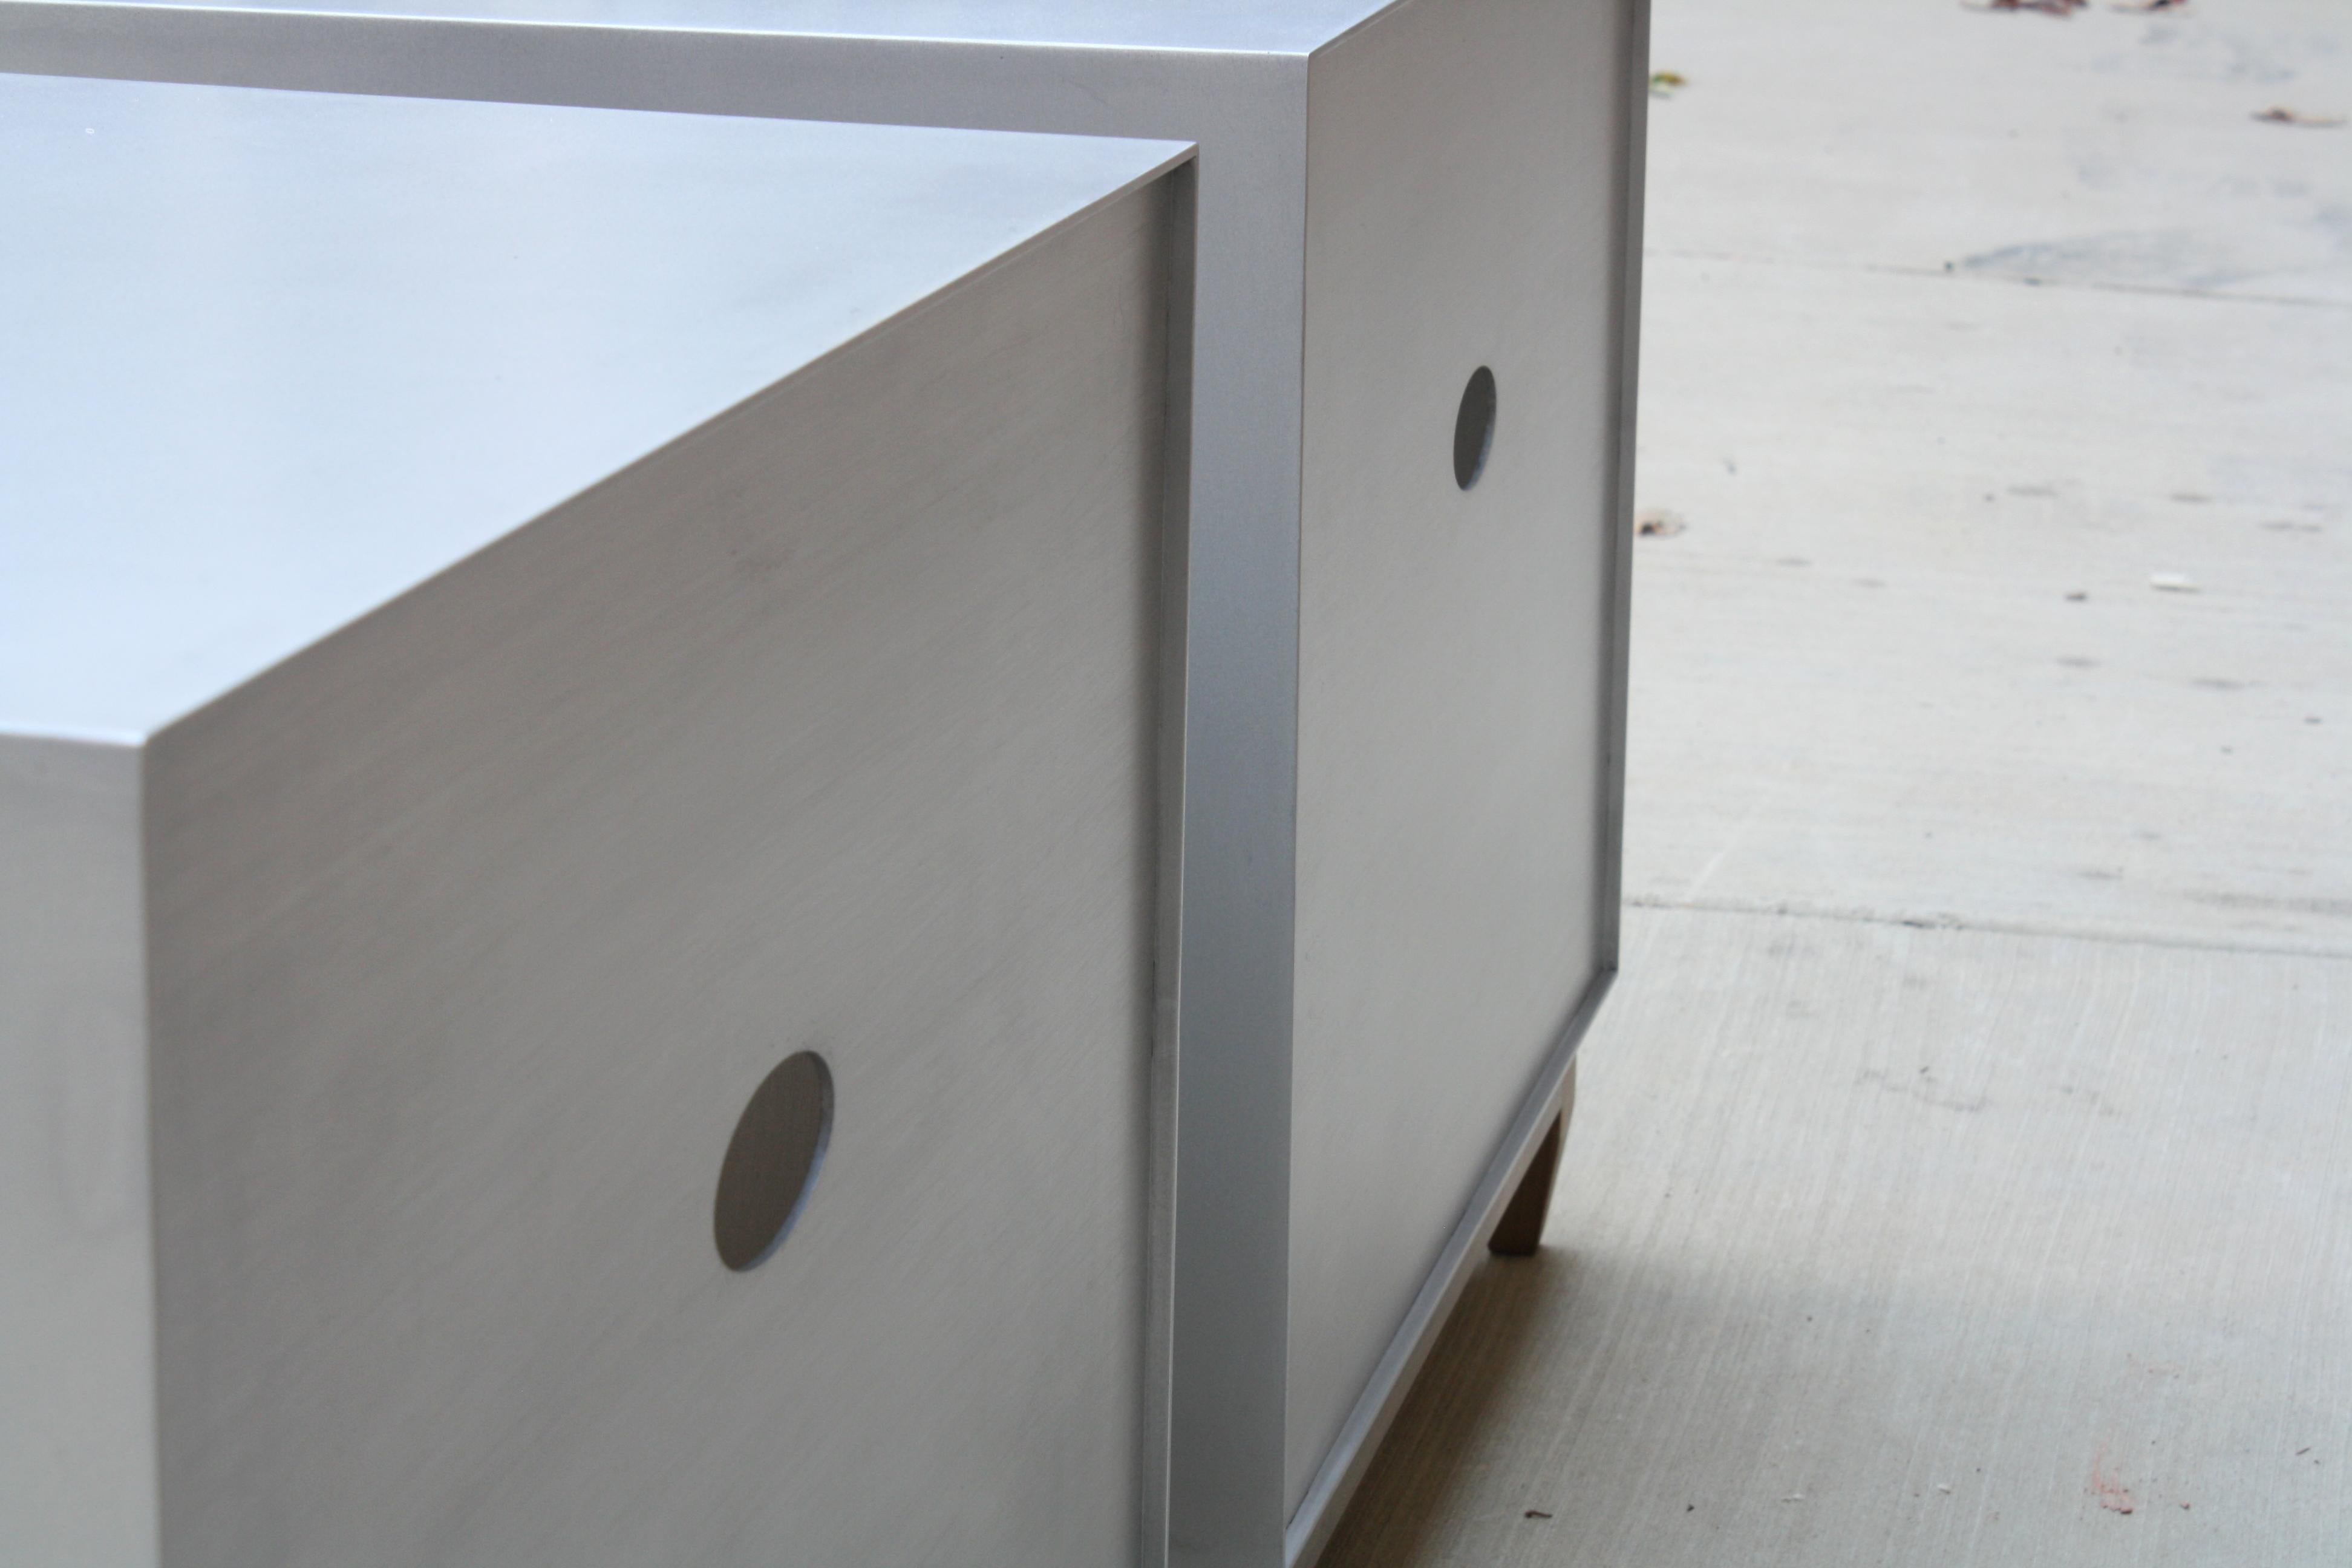 Oxide, Aluminum Side Cabinets with Wood Drawers by Laylo Studio im Zustand „Neu“ im Angebot in Chicago, IL